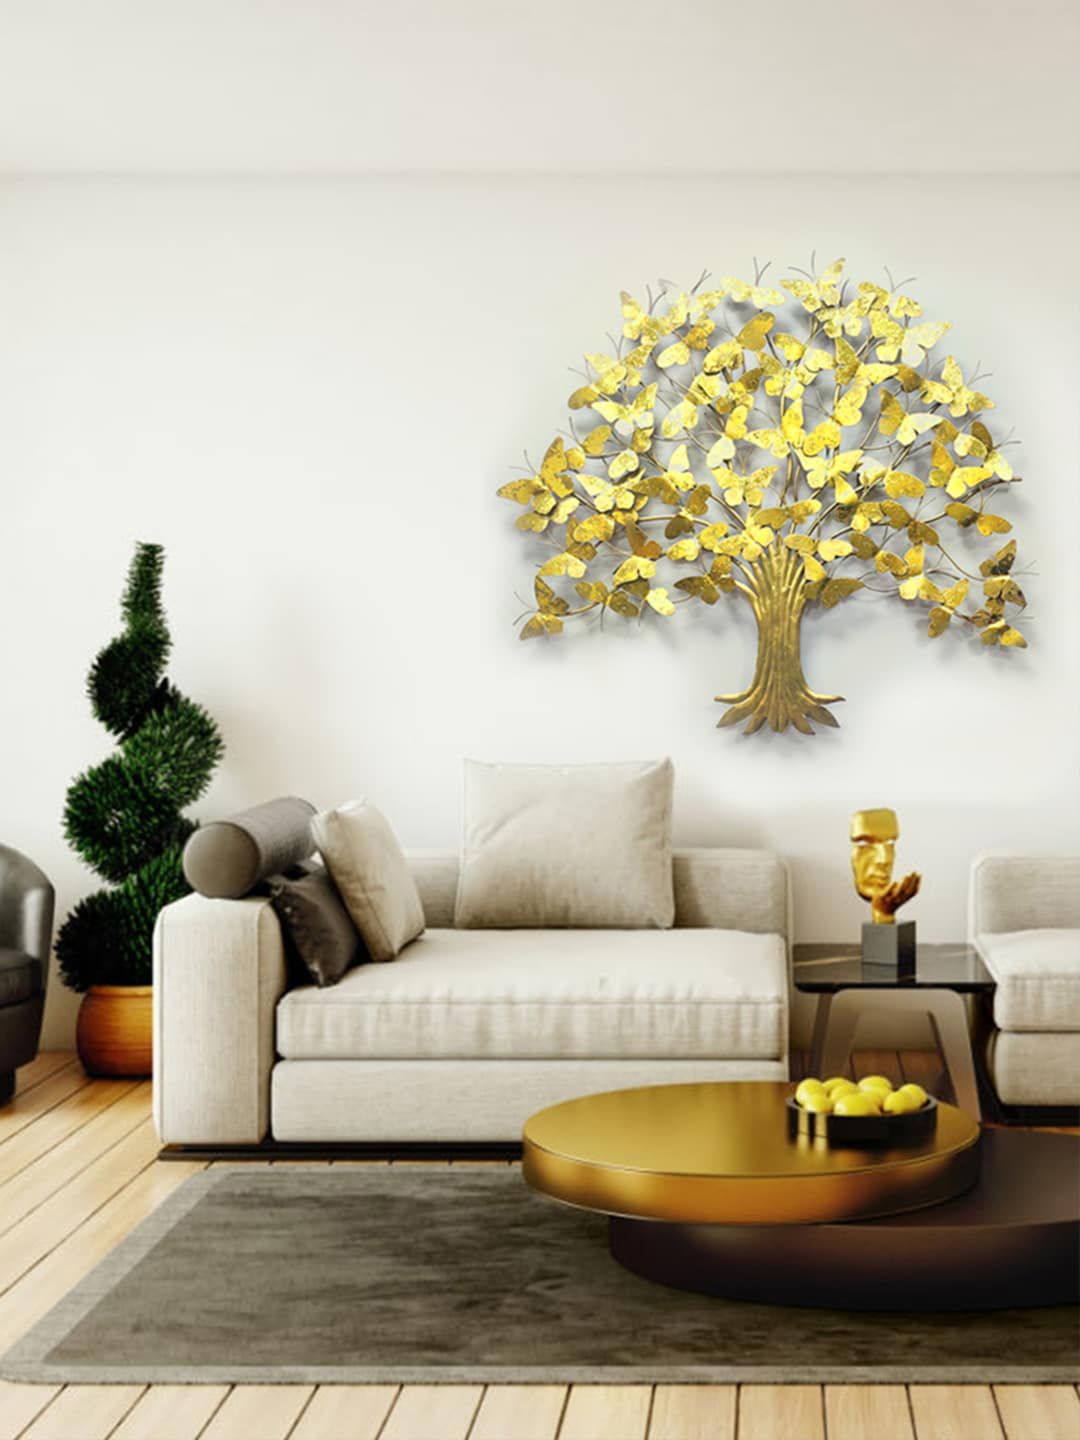 Wembley Toys Gold-Toned 3D Art Iron Wall Decor Price in India